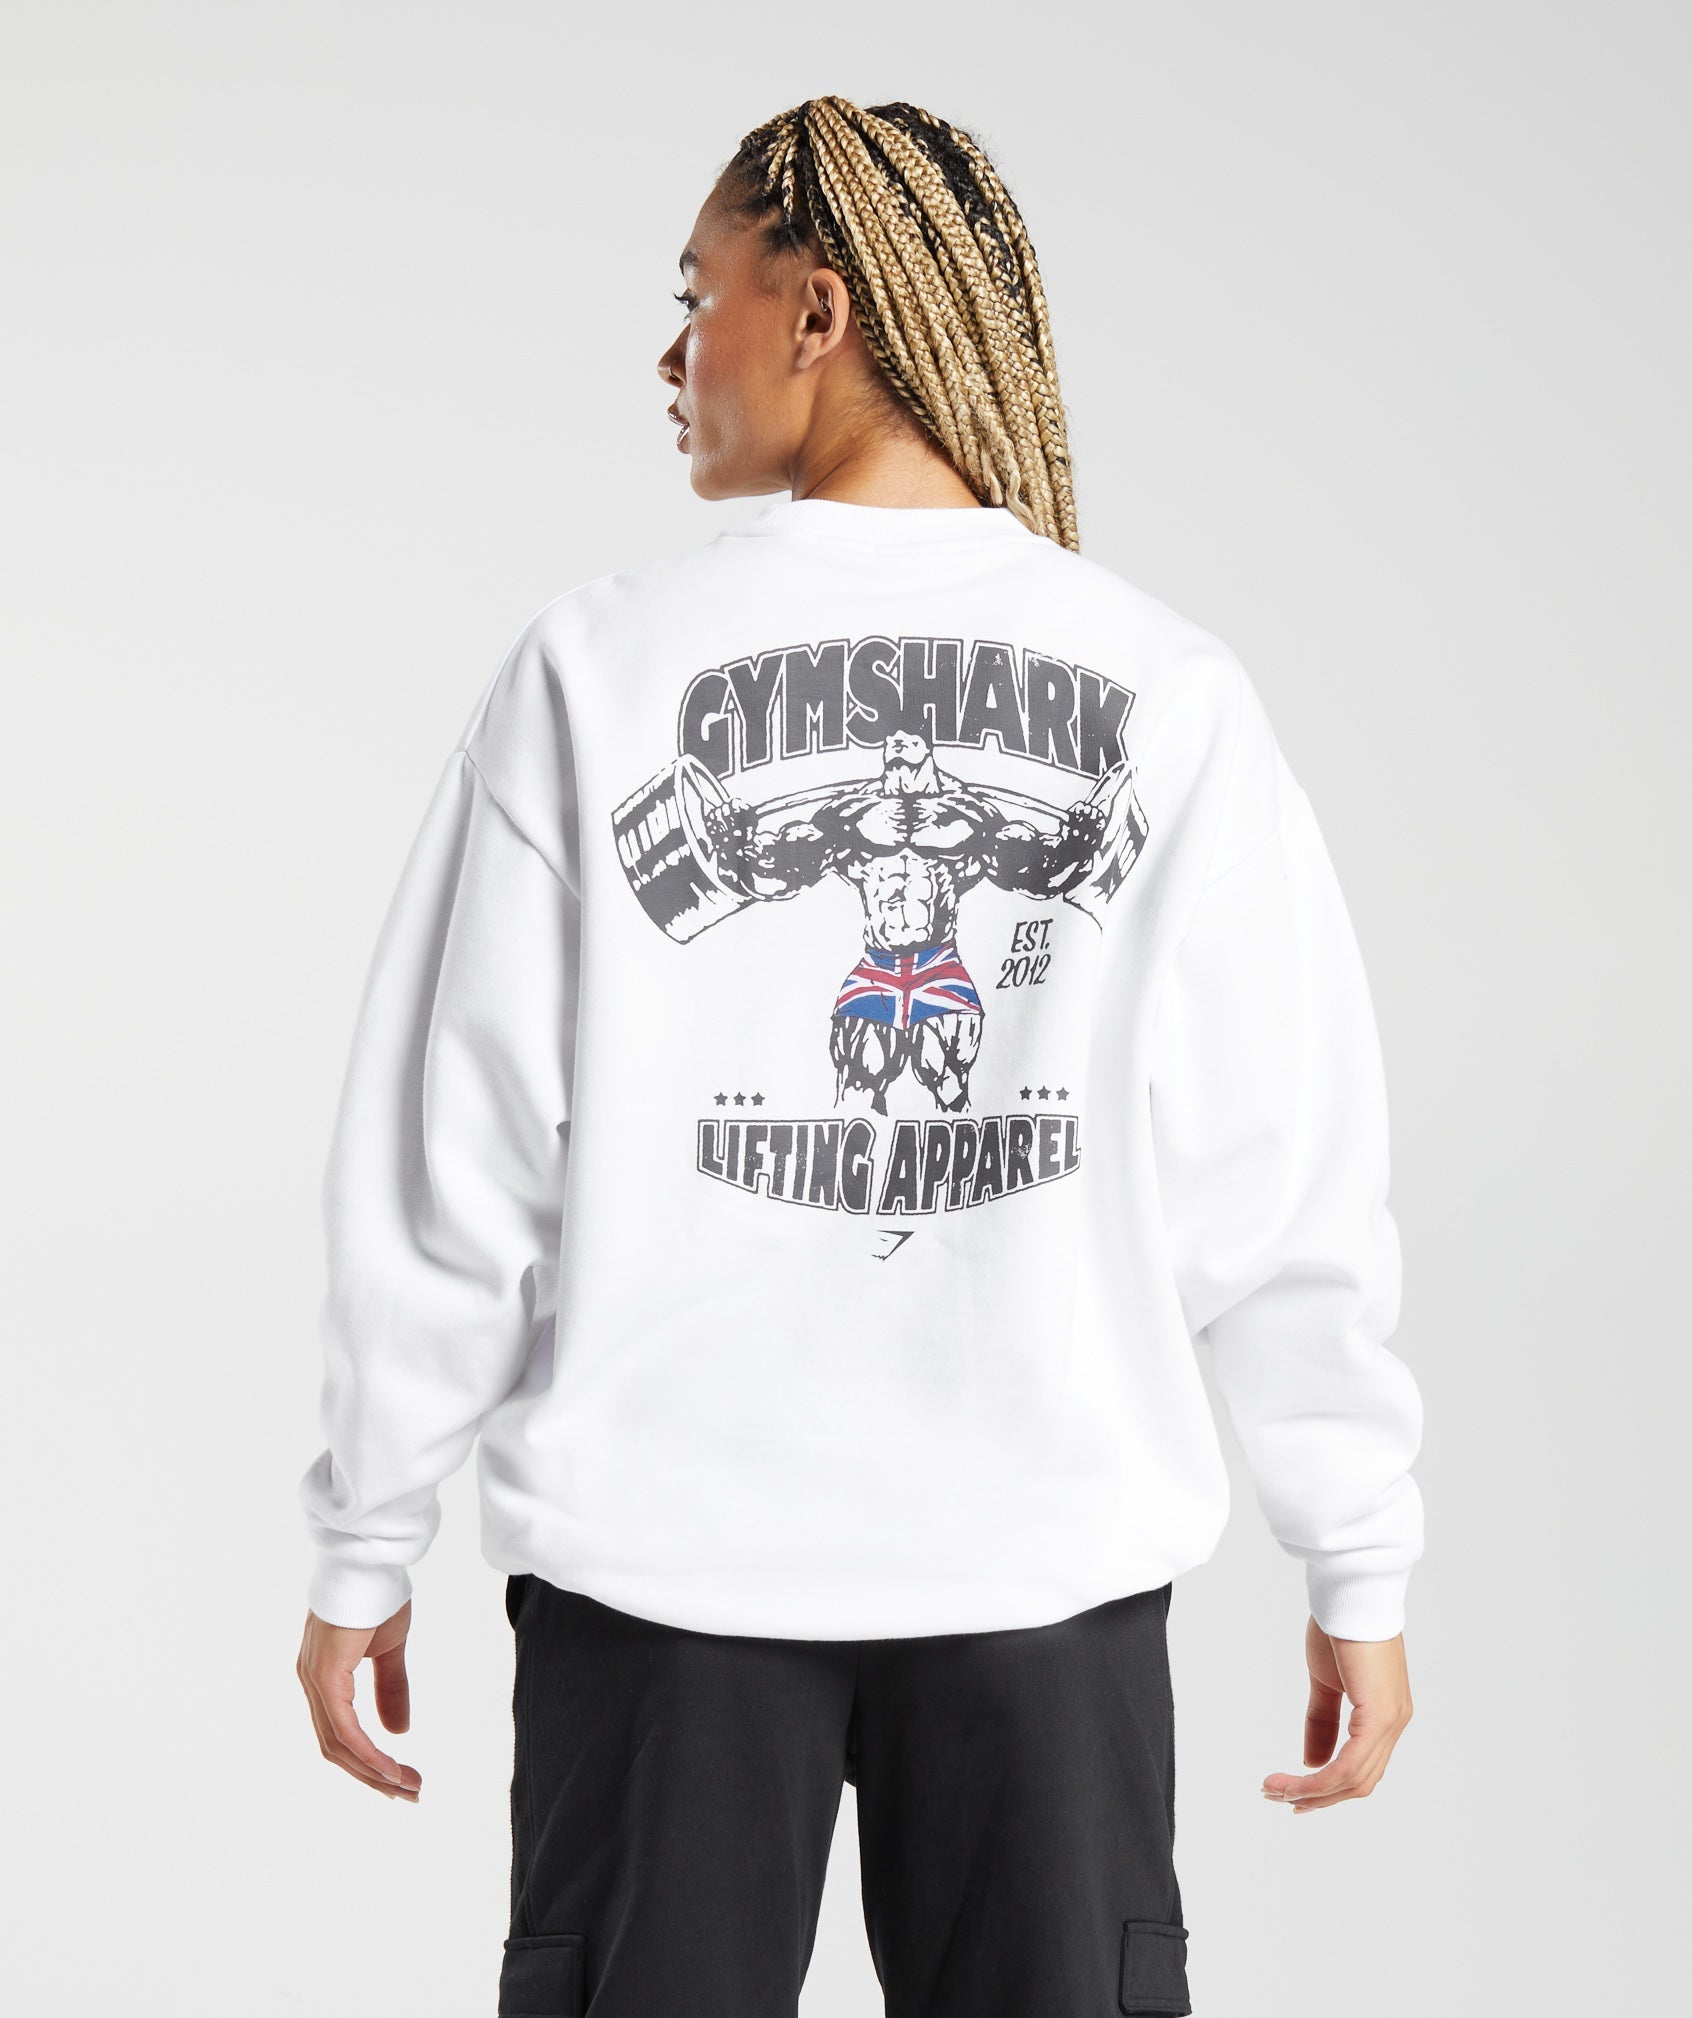 Lifting Apparel Oversized Sweatshirt in White - view 1